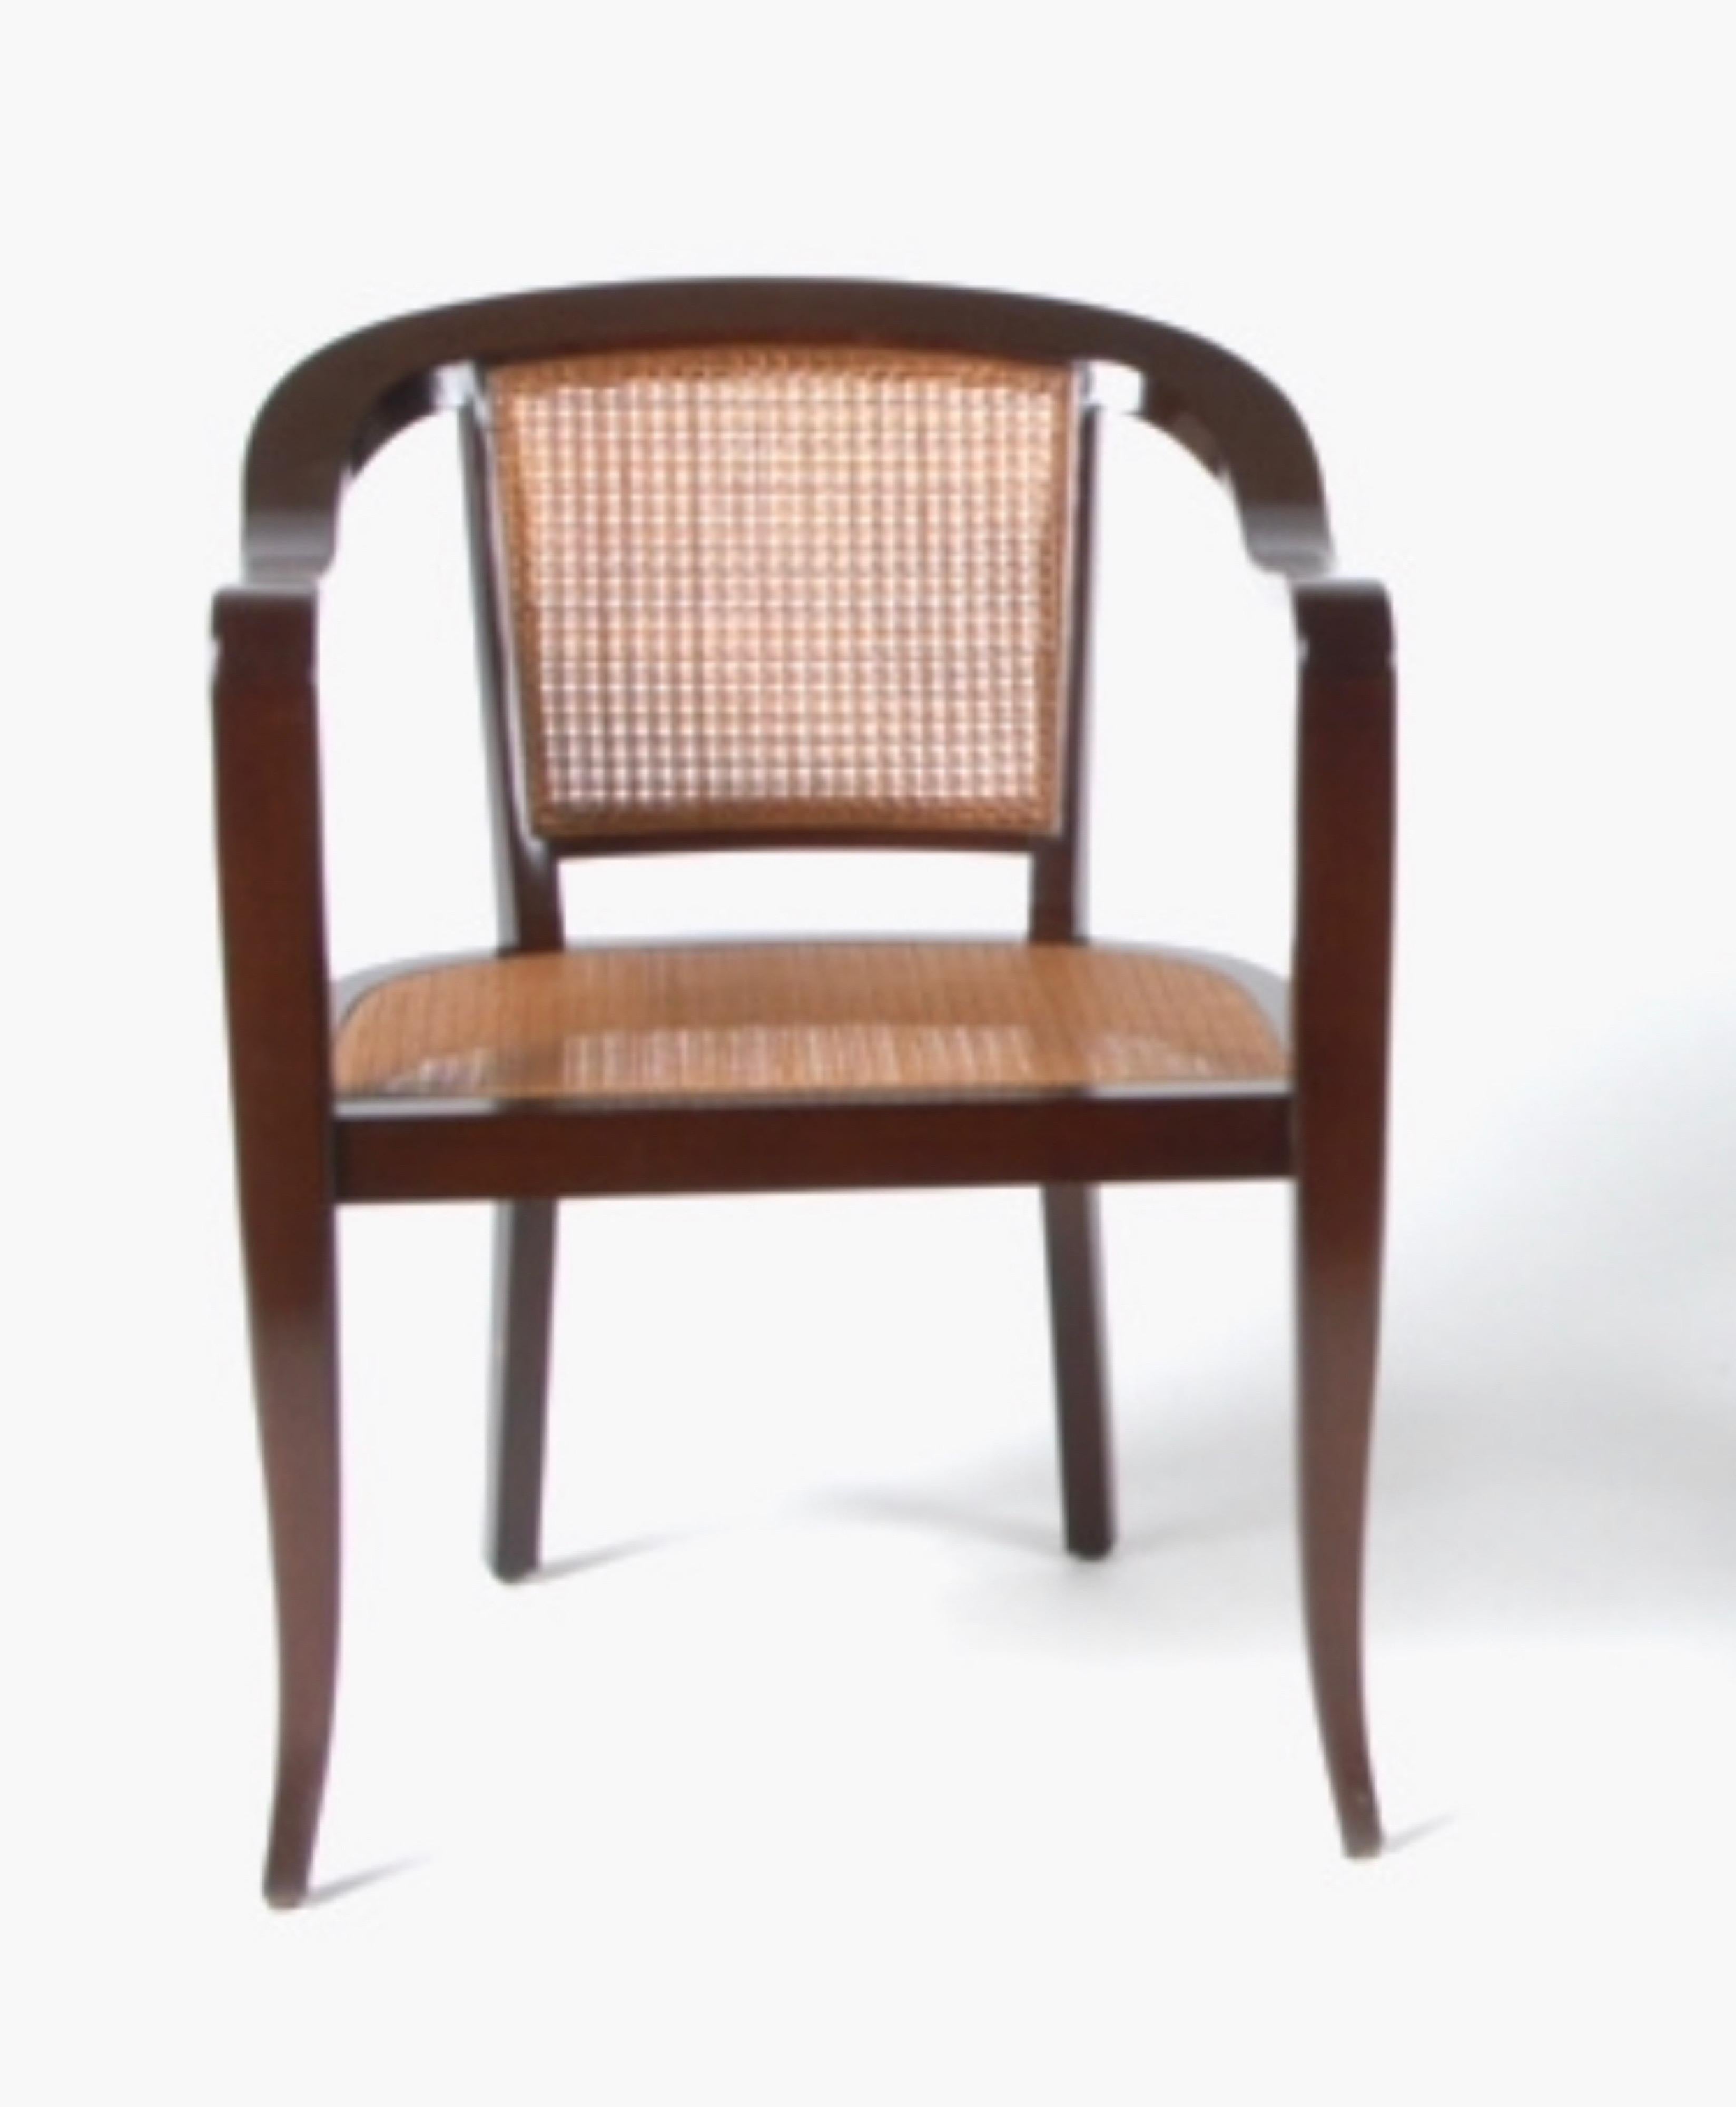 Pair of Edward Wormley for Dunbar style bentwood and cane chairs, circa 1950s that appeared in a 1954 Architectural Digest. Mid century stylish arm chairs. Currently being refinished. Want to see more beautiful things? Scroll down below and click